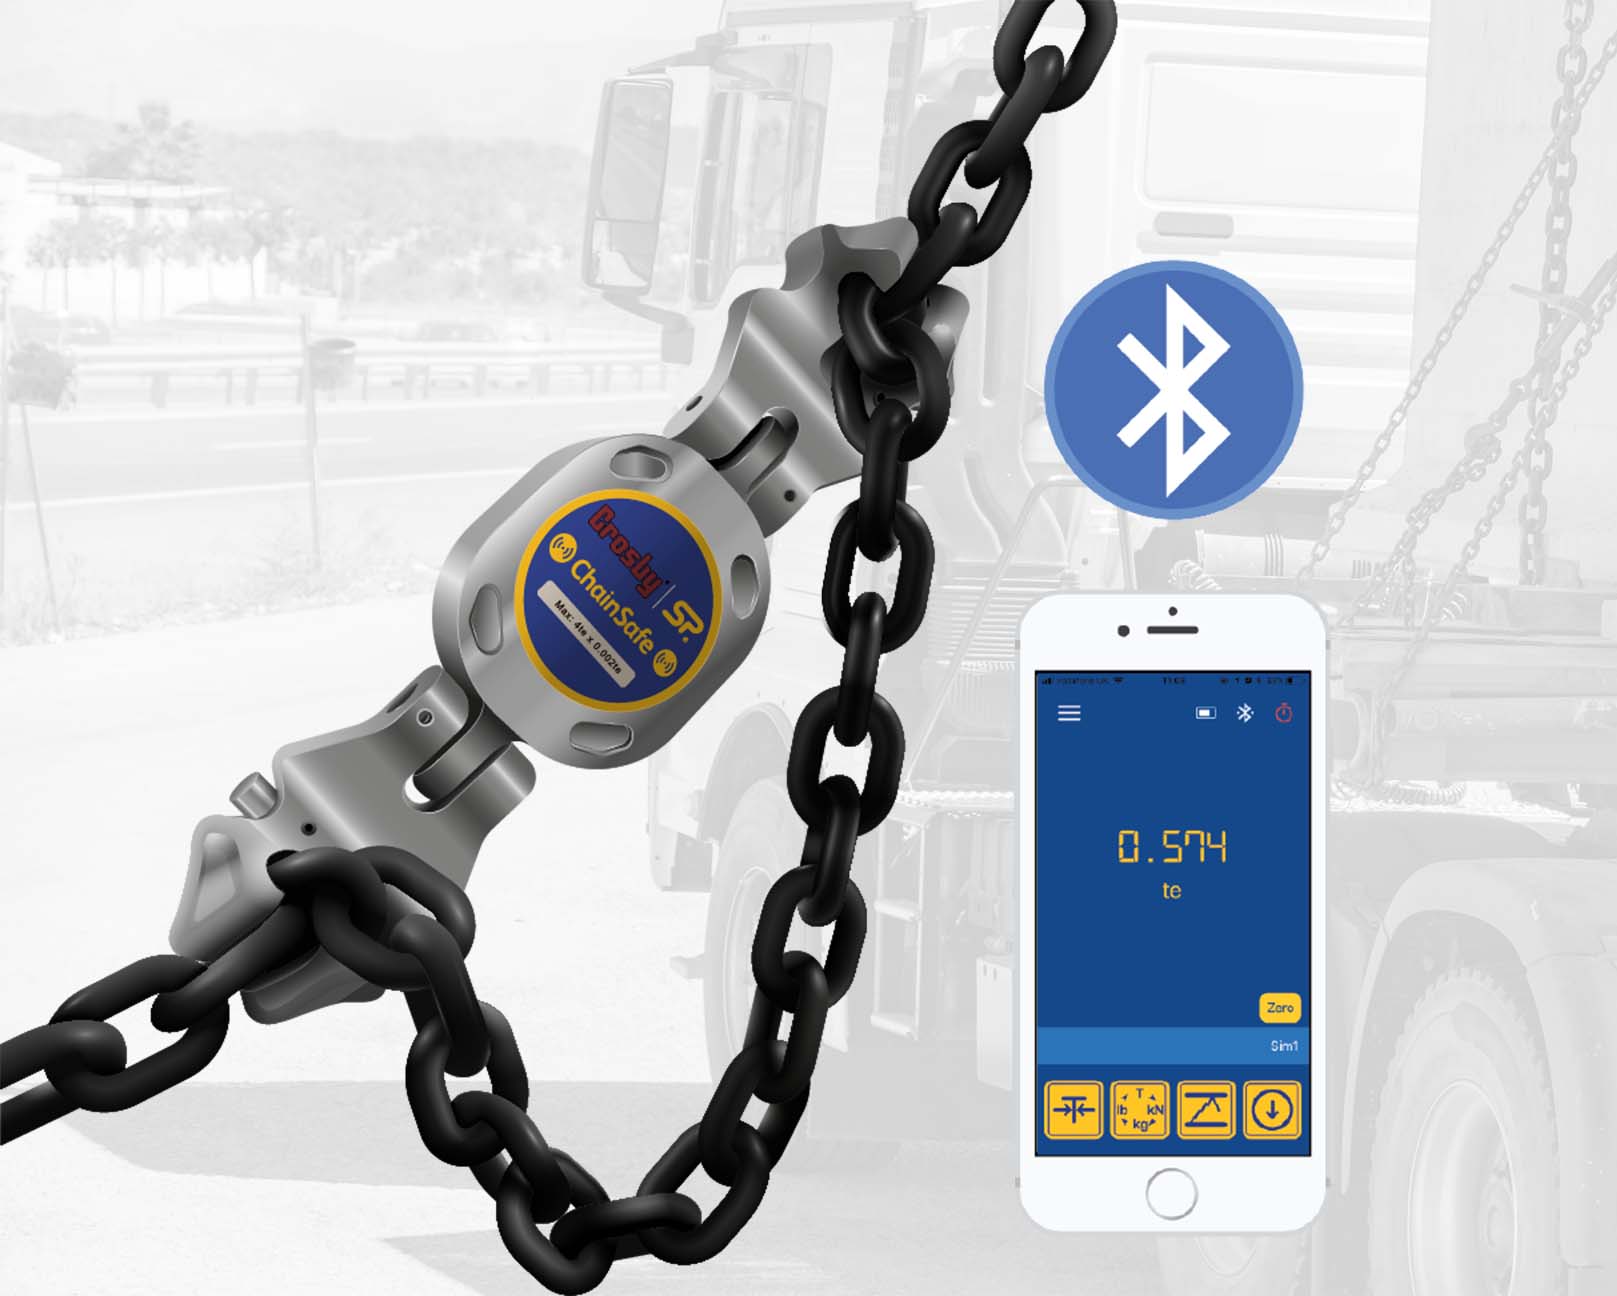 Product shot of ChainSafe attached to chain.